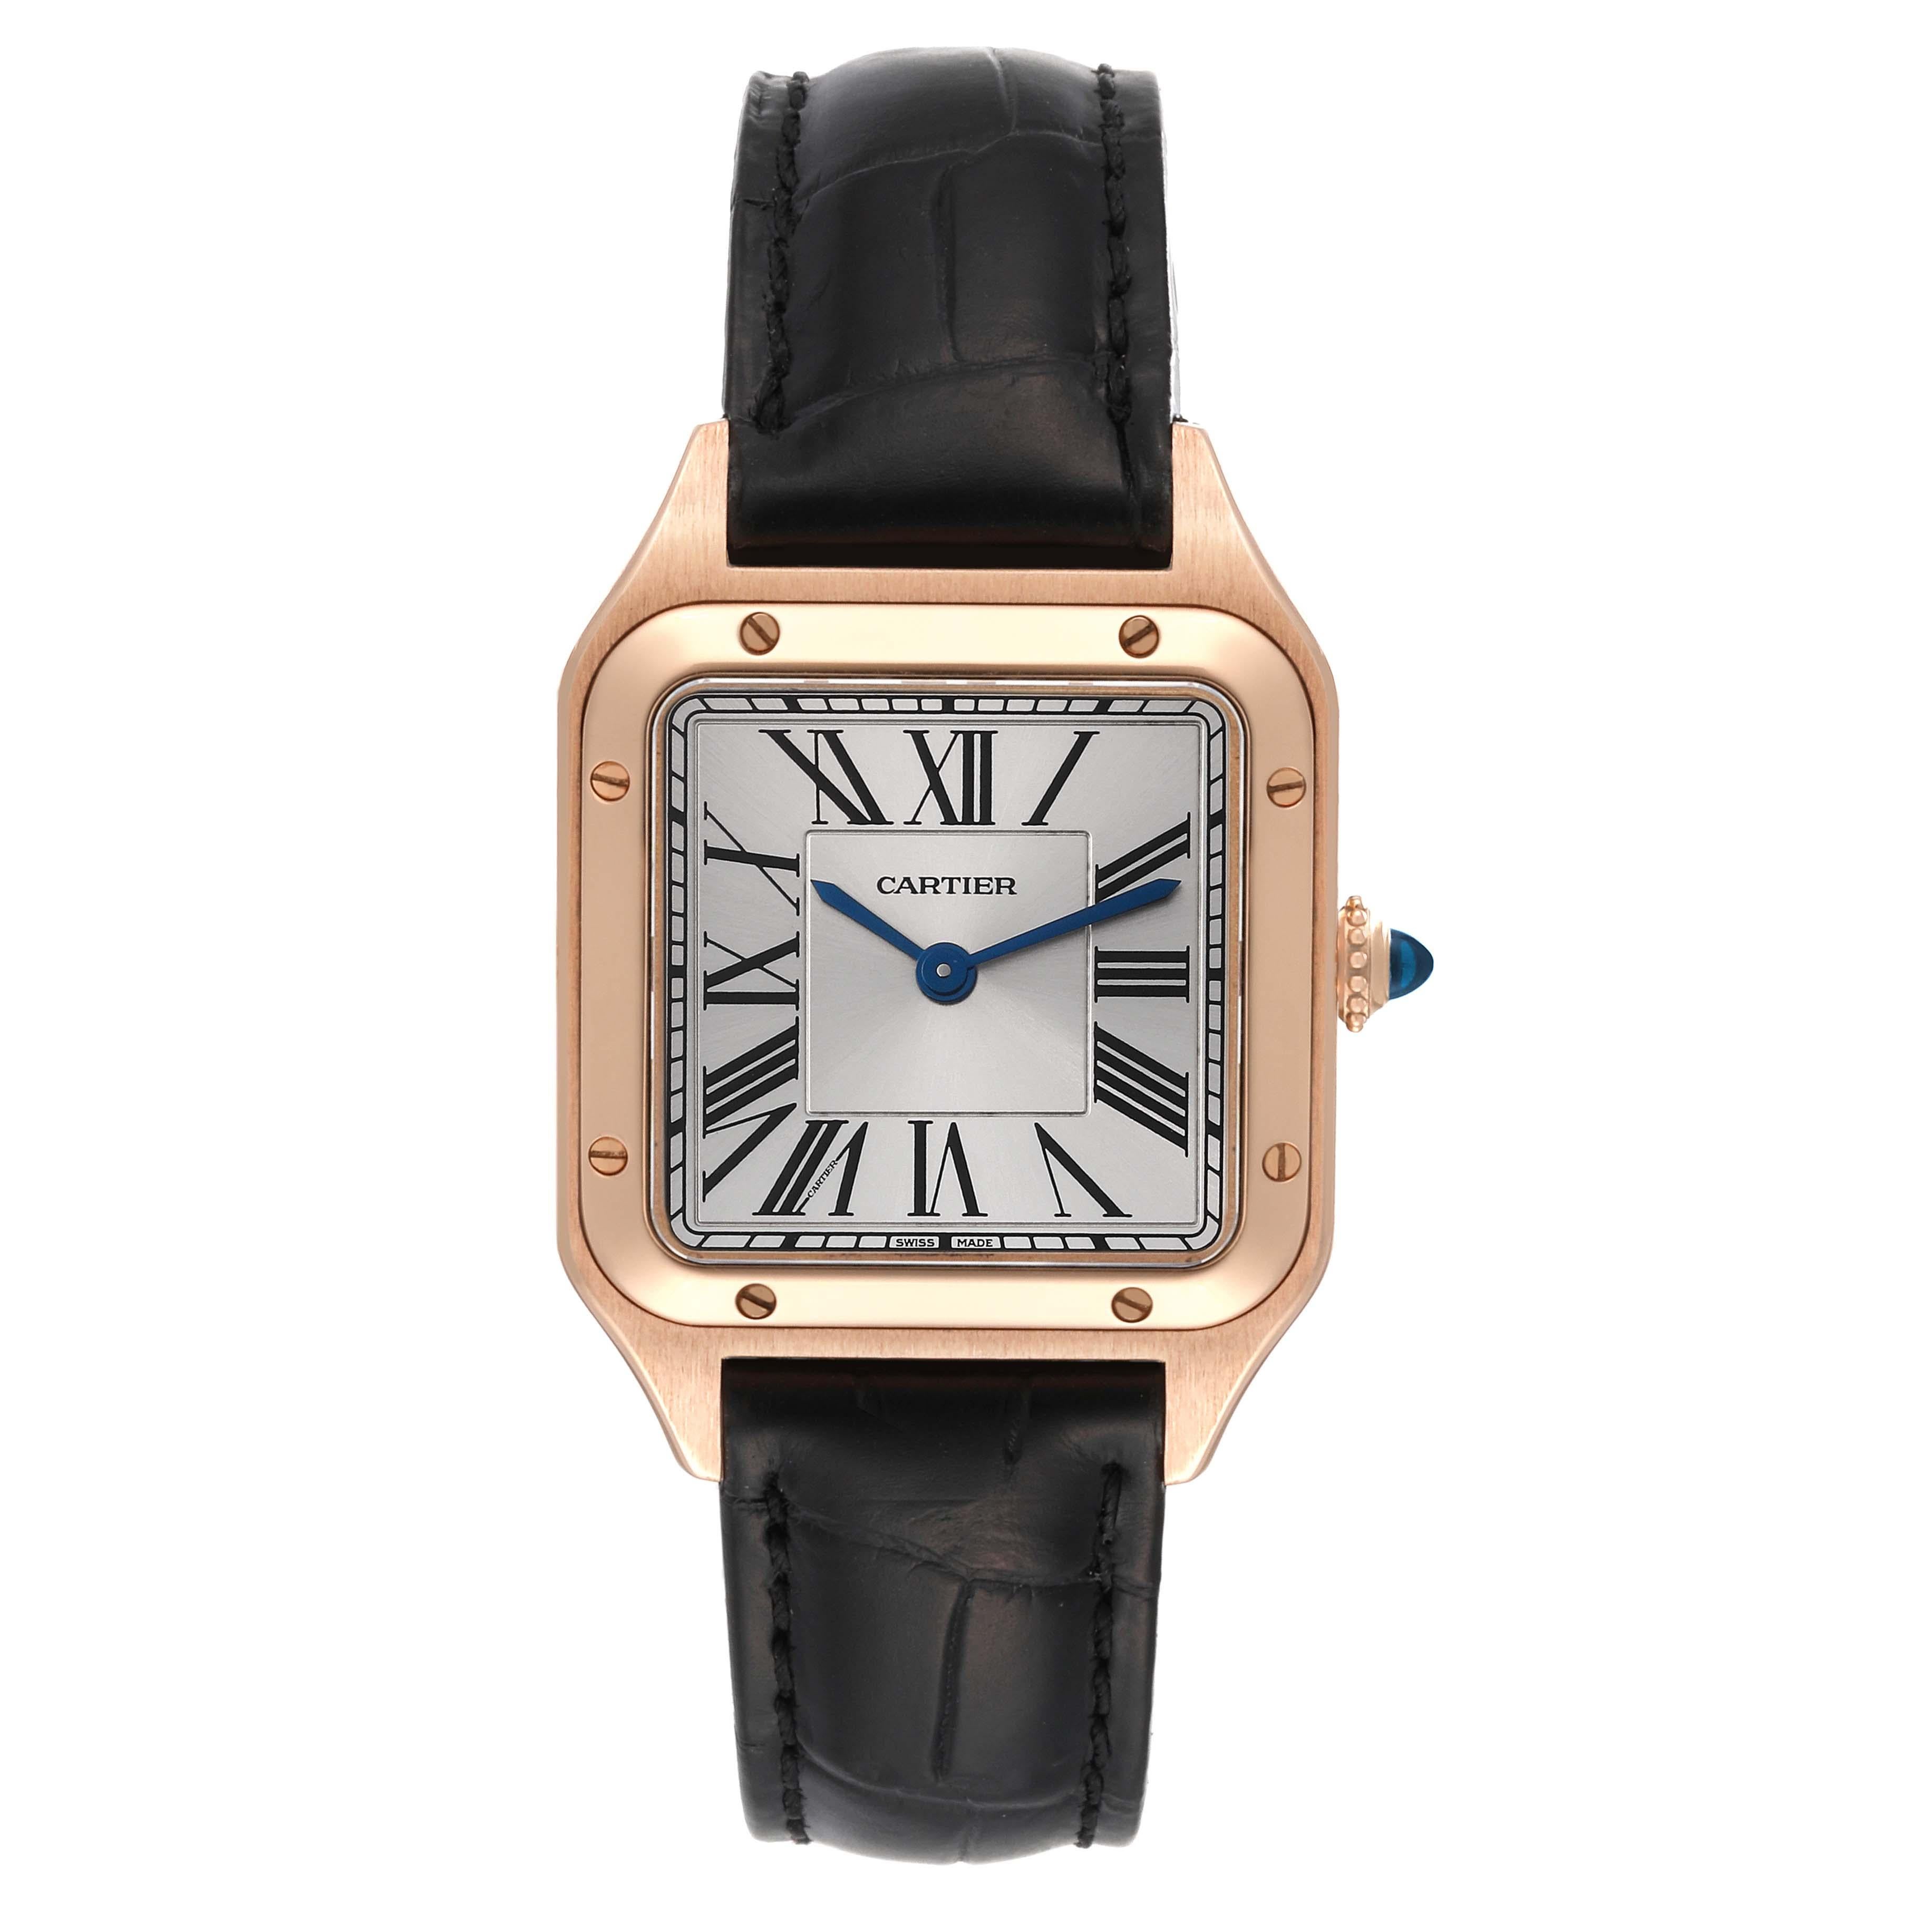 Cartier Santos Dumont Small Rose Gold Mens Watch WGSA0022 Card. Quartz movement. 18k rose gold case 38 mm x 27.5 mm. Case thickness 7.3 mm. Circular grained crown set with blue spinel cabochon. . Scratch resistant sapphire crystal. Satin-brushed